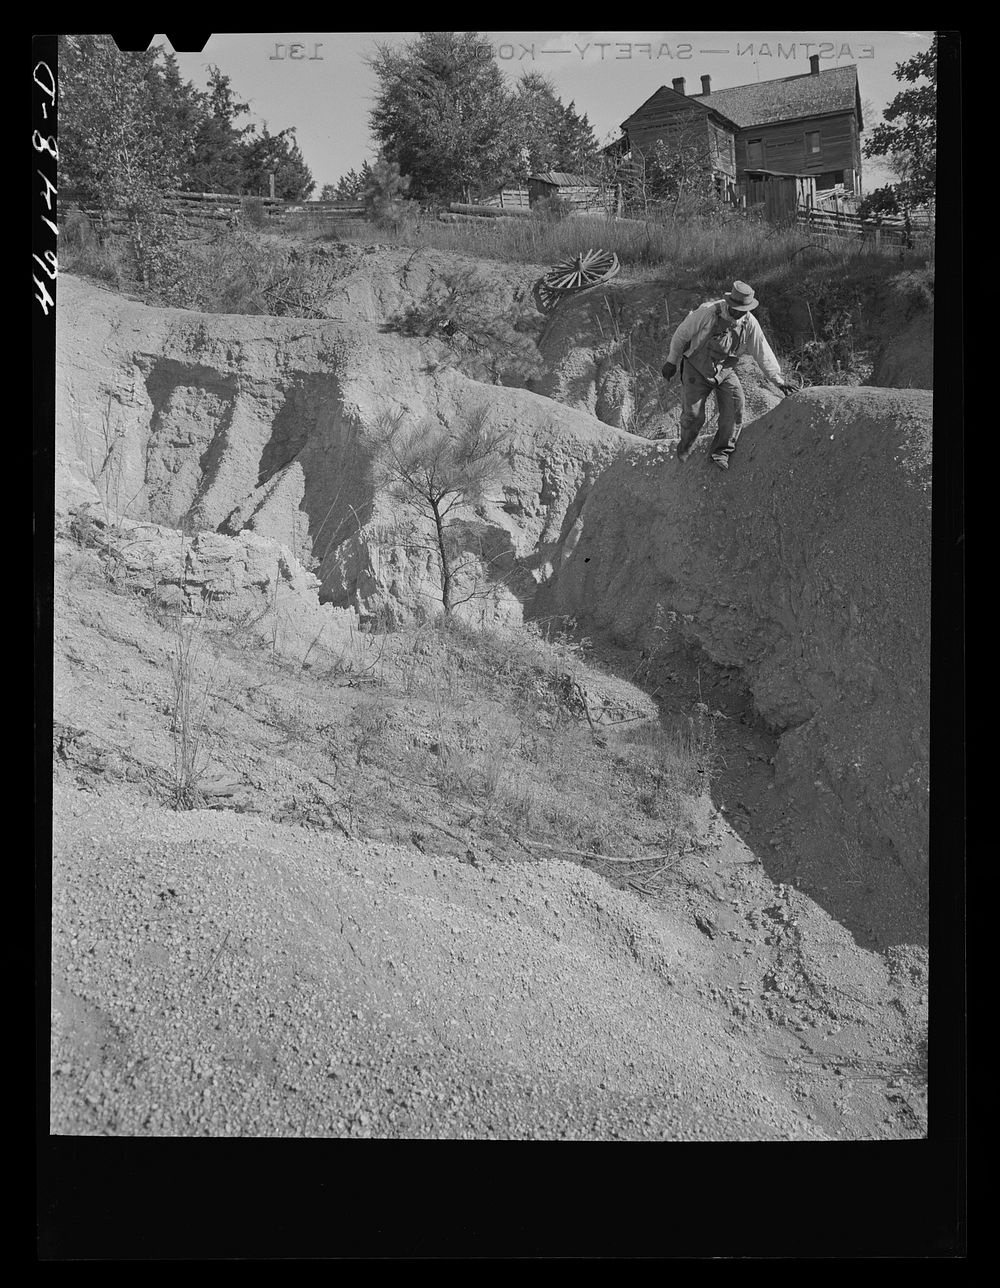 Greene County, Georgia. Severe gully erosion on a farm in northwestern. Sourced from the Library of Congress.